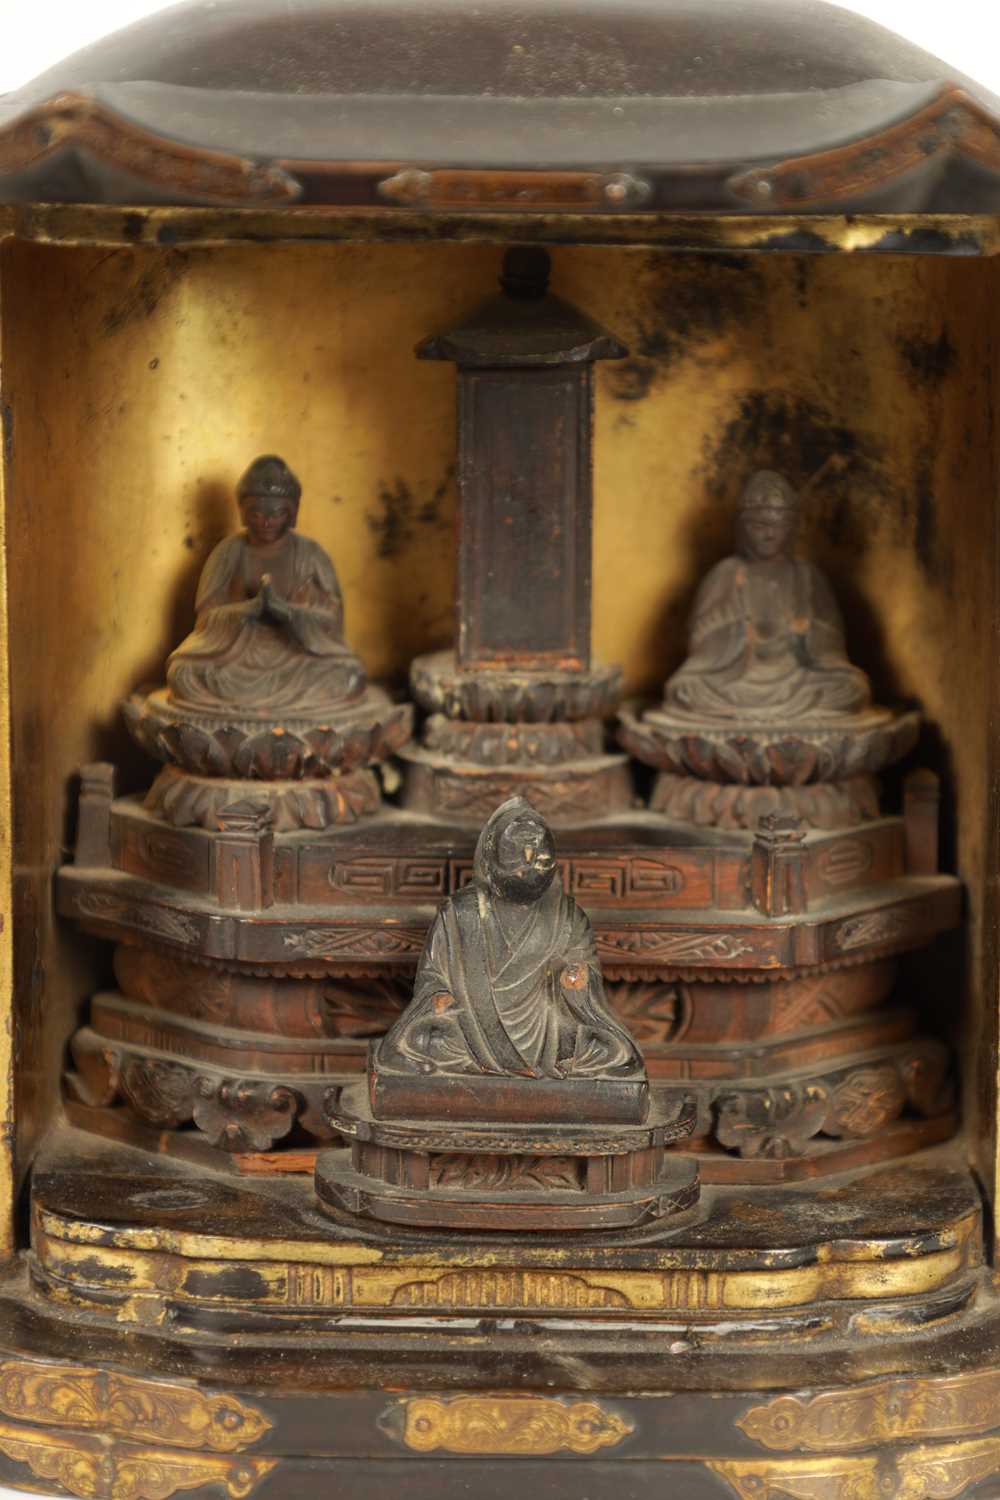 A 19TH CENTURY BLACK LACQUER BUDDHIST TRAVELLING PRAYER SHRINE - Image 3 of 6